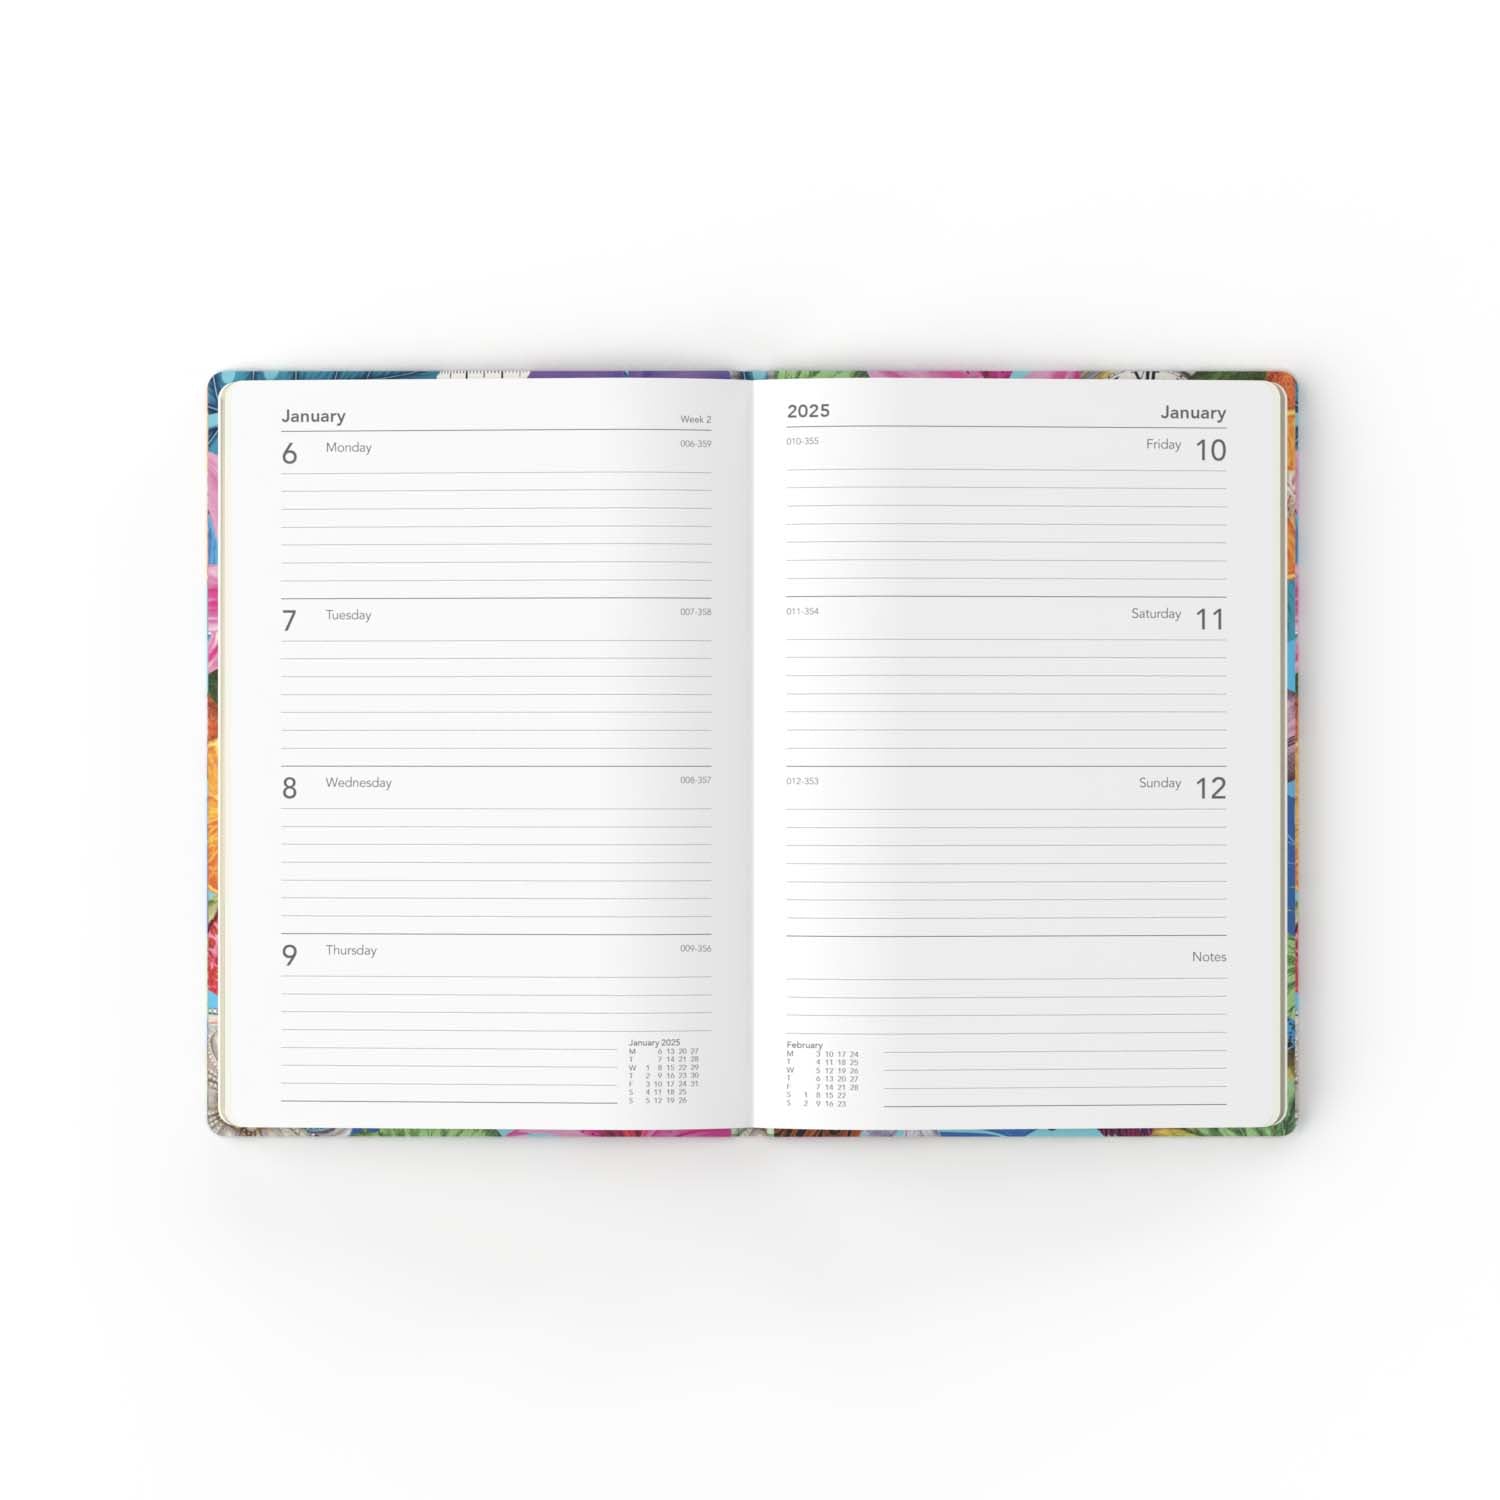 Maxamilism - A5 Week-to-View 2024-2025 Financial Year Diary/Planner